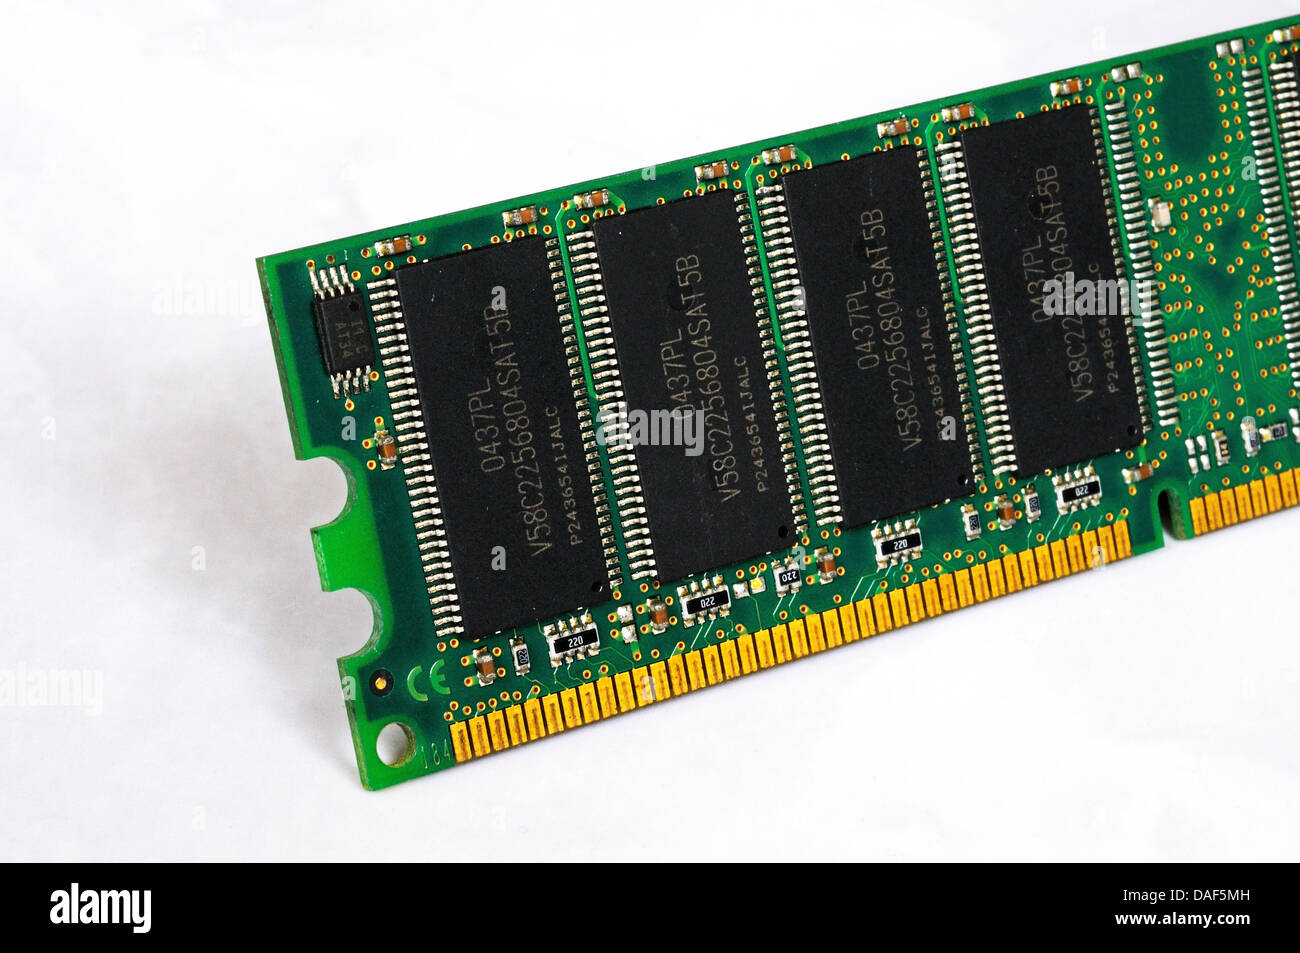 DIMM RAM, Dual Inline Memory Module, dynamic random access memory circuits  for PC's, Workstations and Servers Stock Photo - Alamy